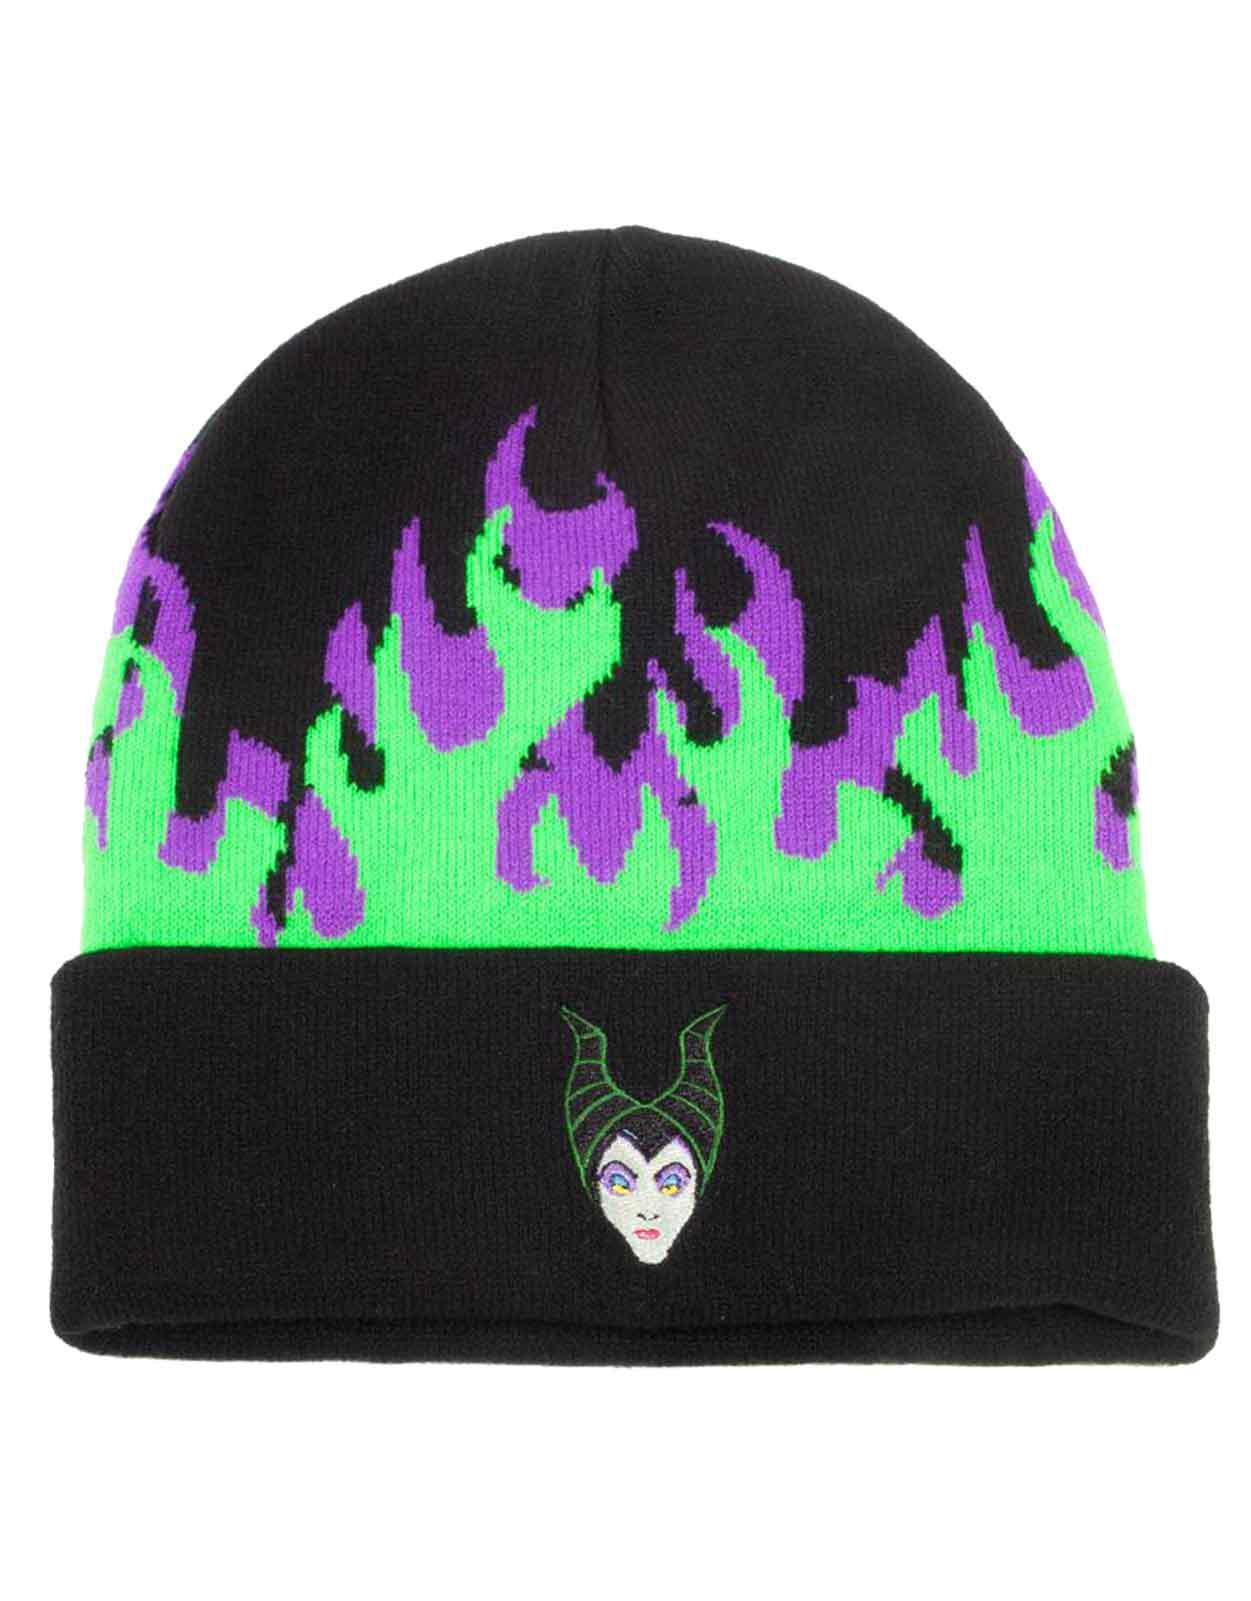 Maleficent Beanie Hat Flames Logo Roll Up new Official Disney Black One Size